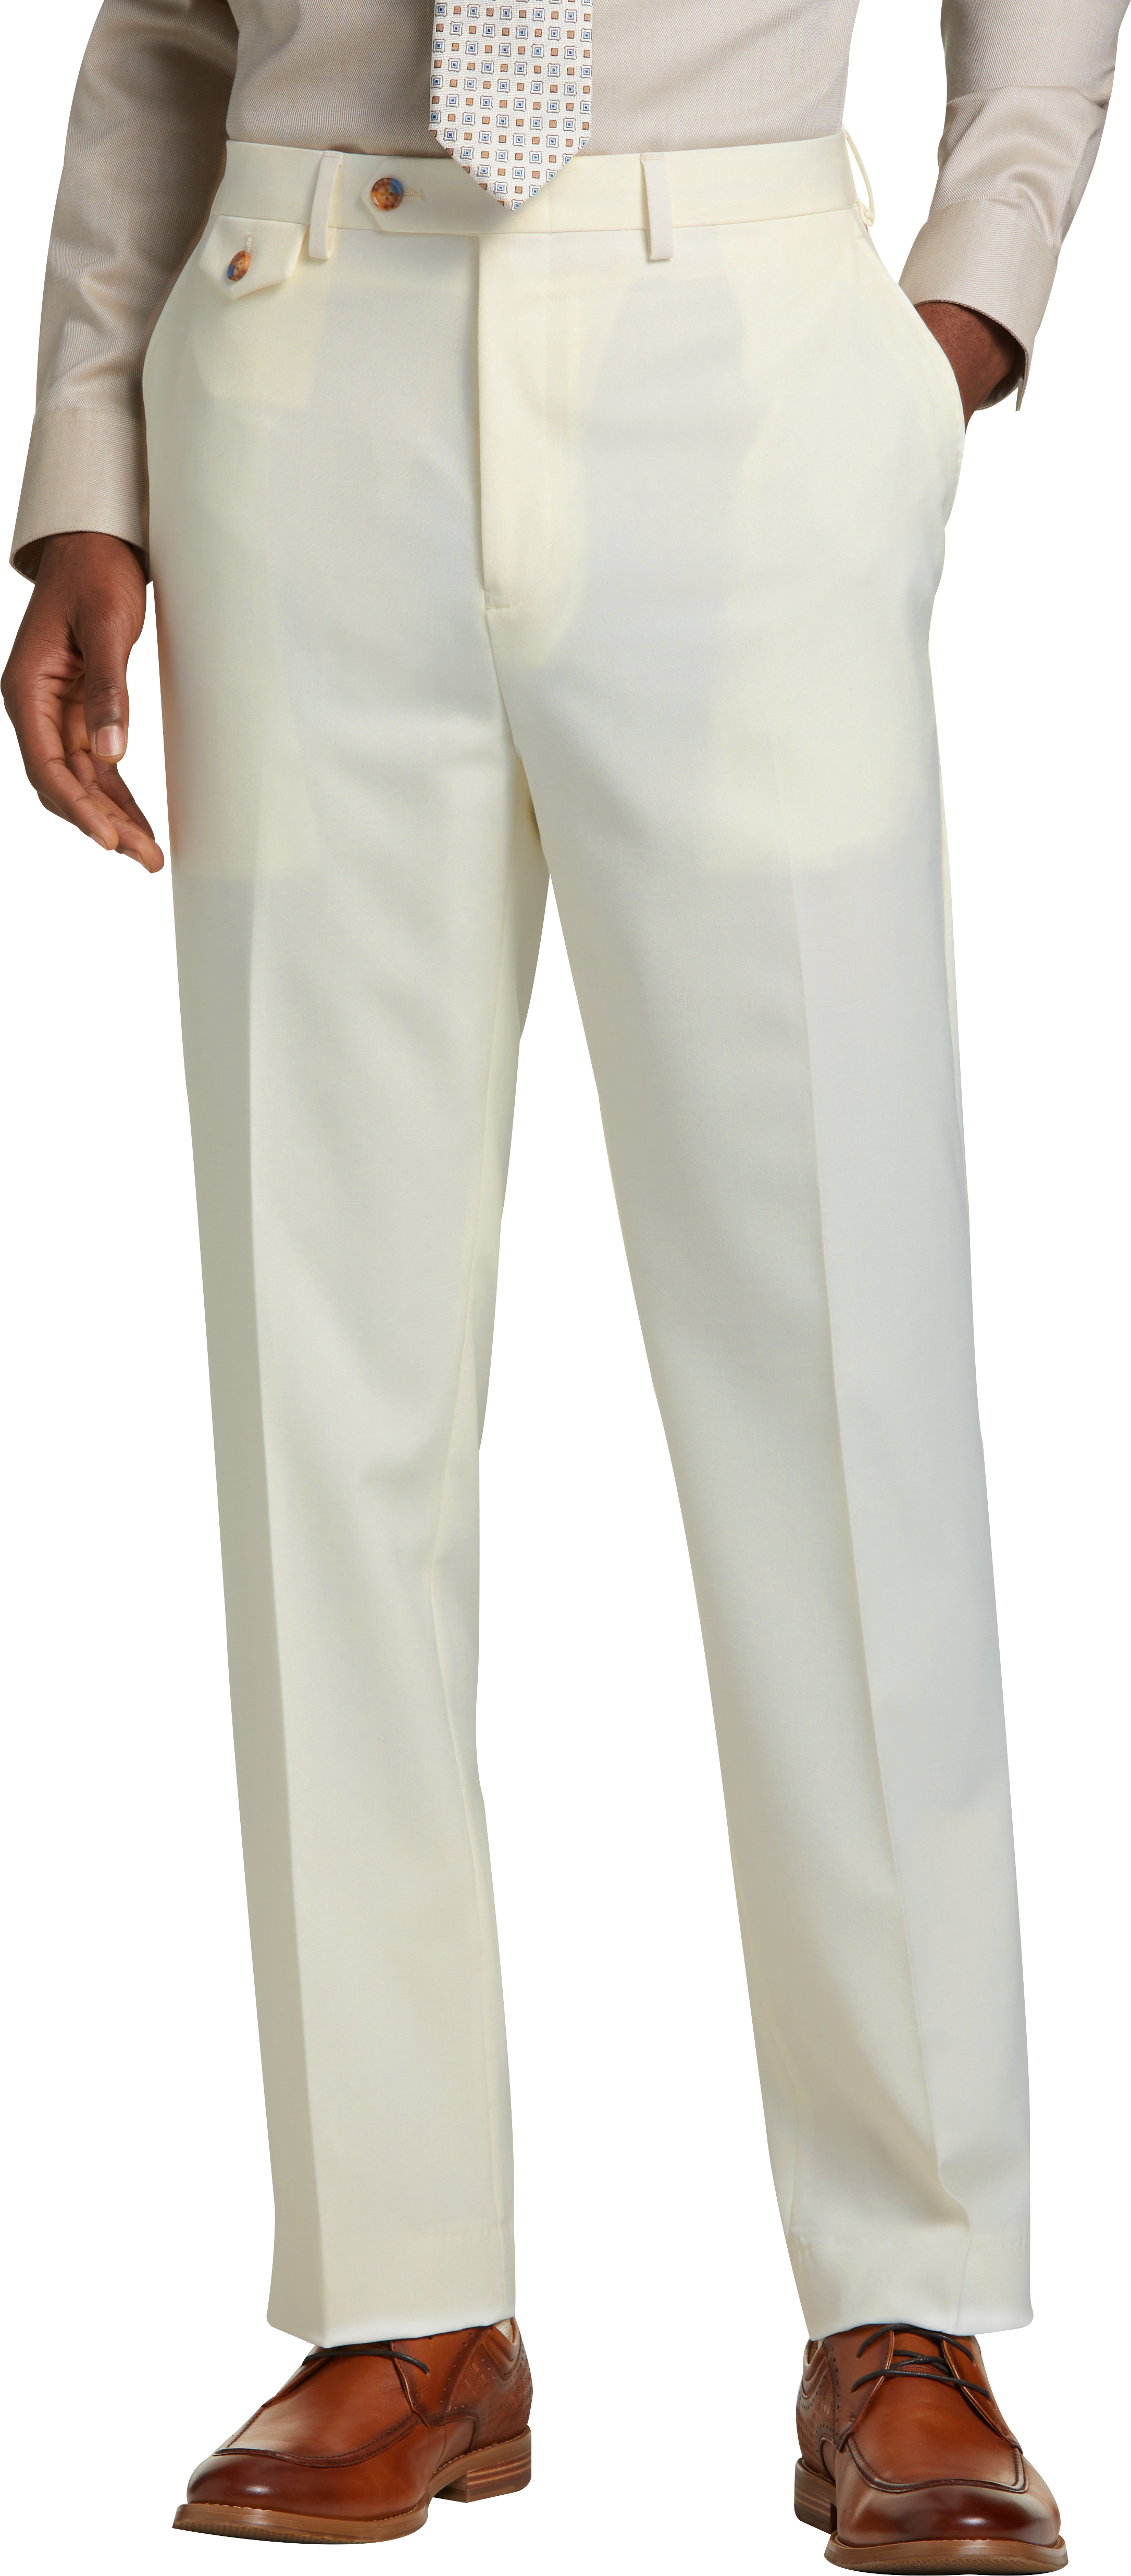 Tayion Classic Fit Suit Separates Pants, White